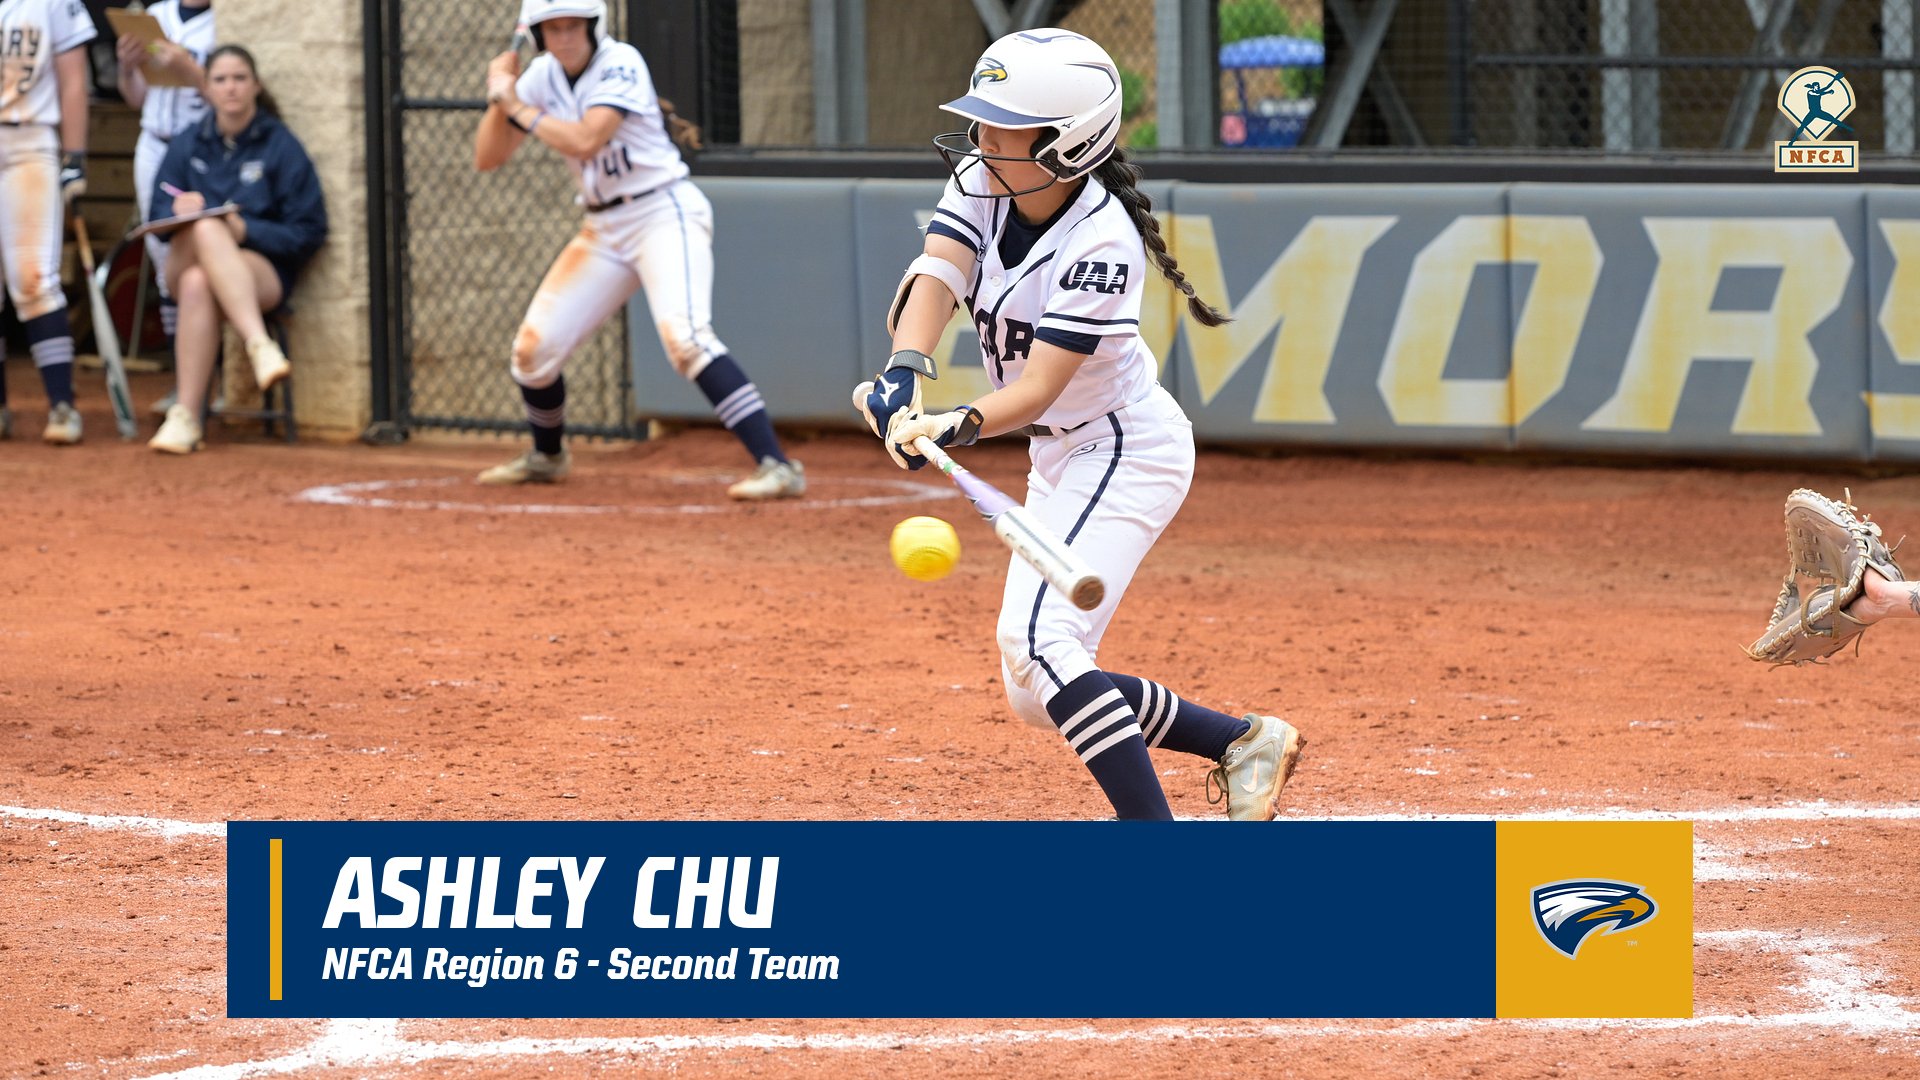 Chu Honored by NFCA; Named to Region 6 Second Team